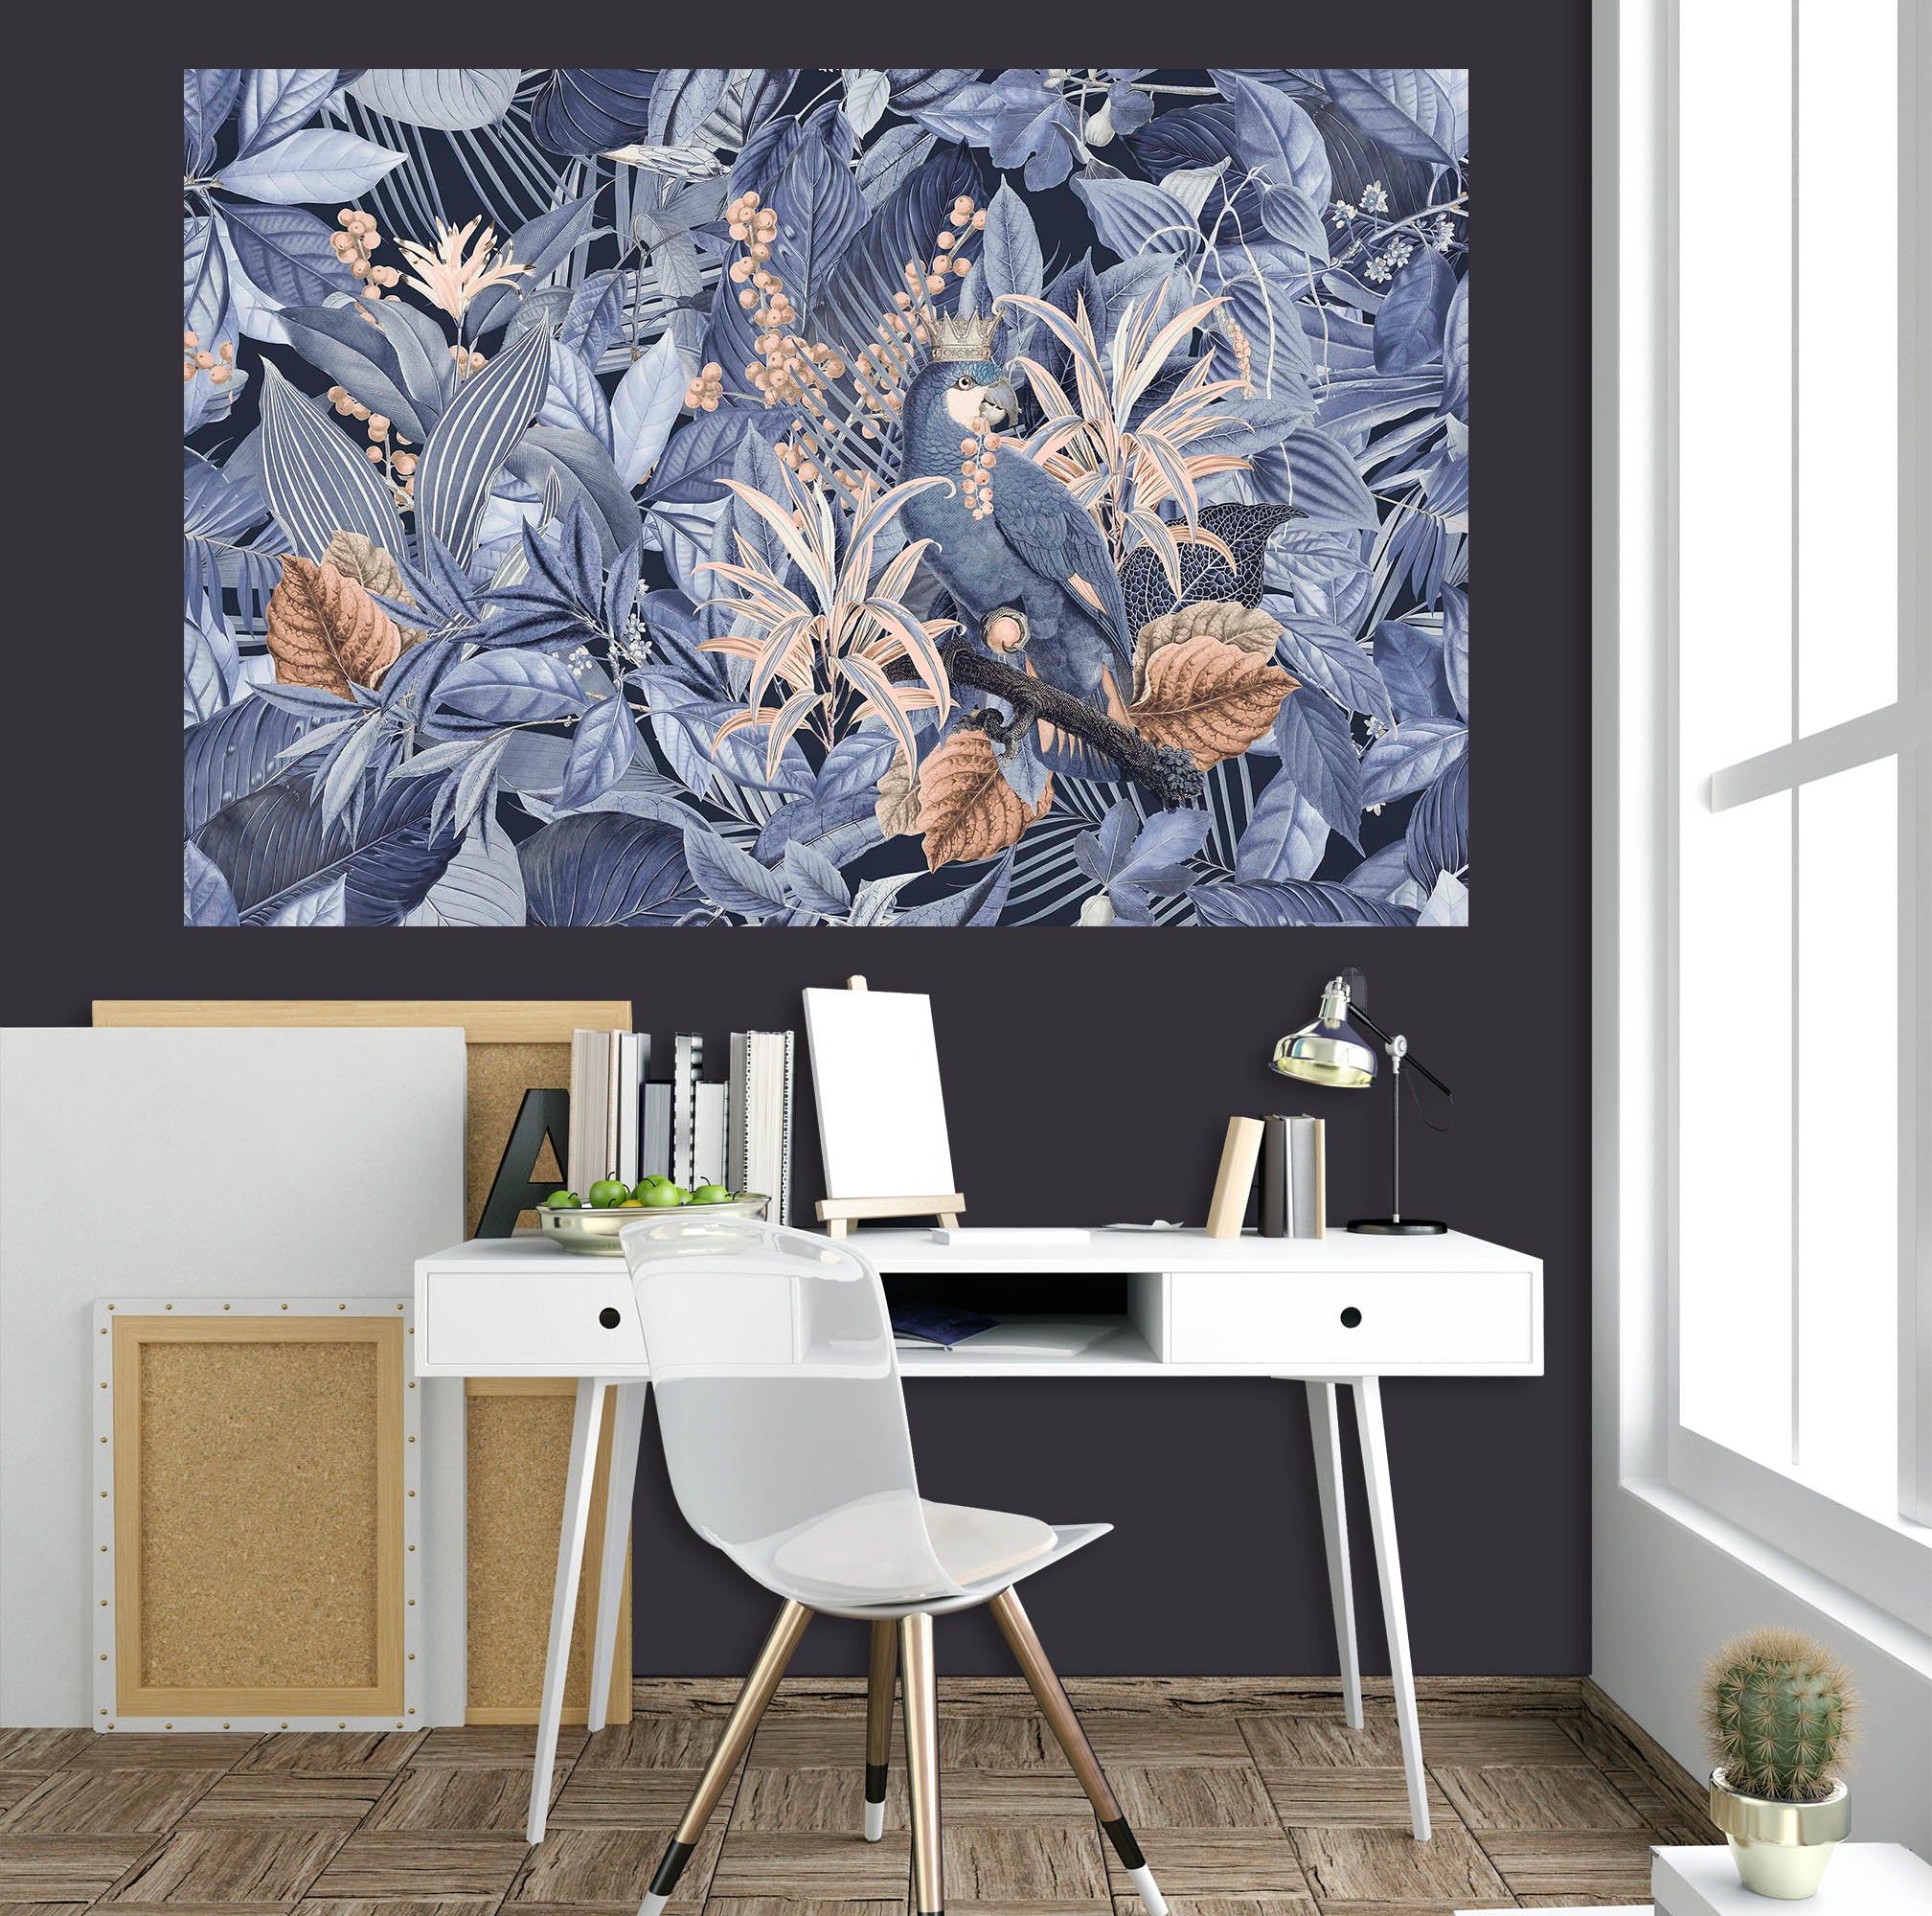 3D Night Forest 105 Andrea haase Wall Sticker